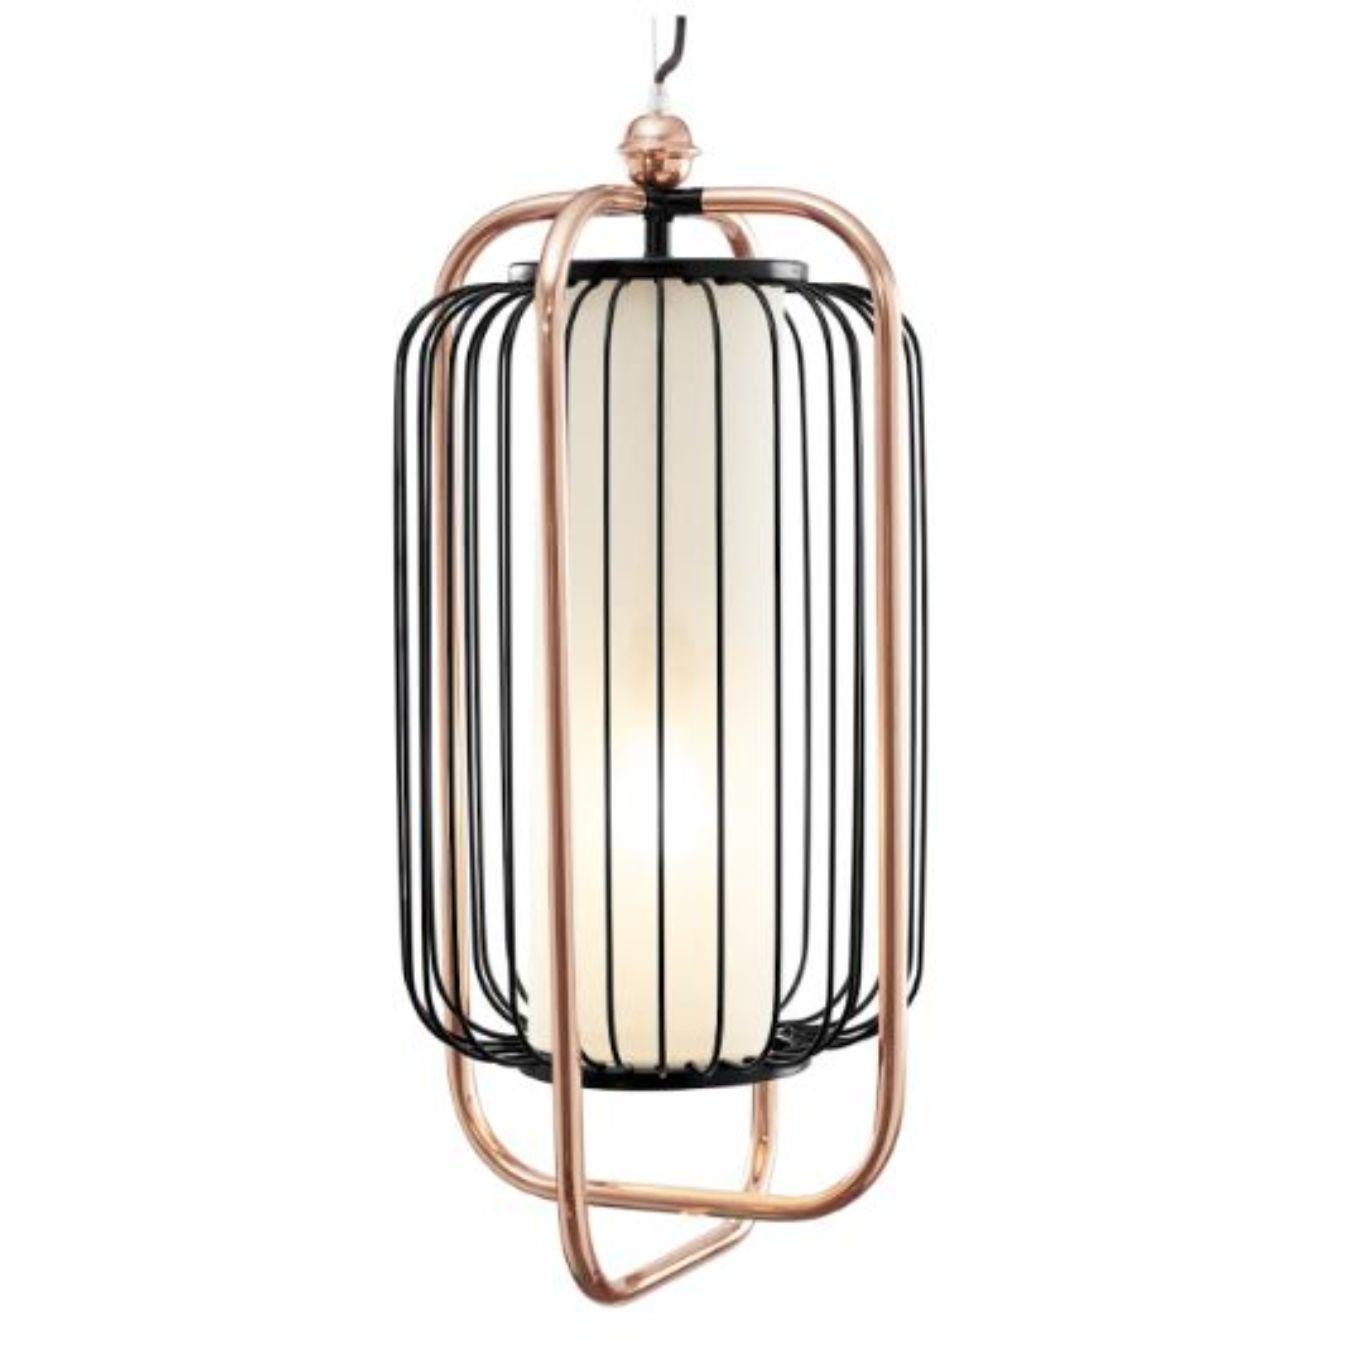 Copper and black Jules II suspension lamp by Dooq
Dimensions: W 30 x D 30 x H 64 cm
Materials: lacquered metal, polished or brushed metal, copper.
Abat-jour: cotton
Also available in different colours and